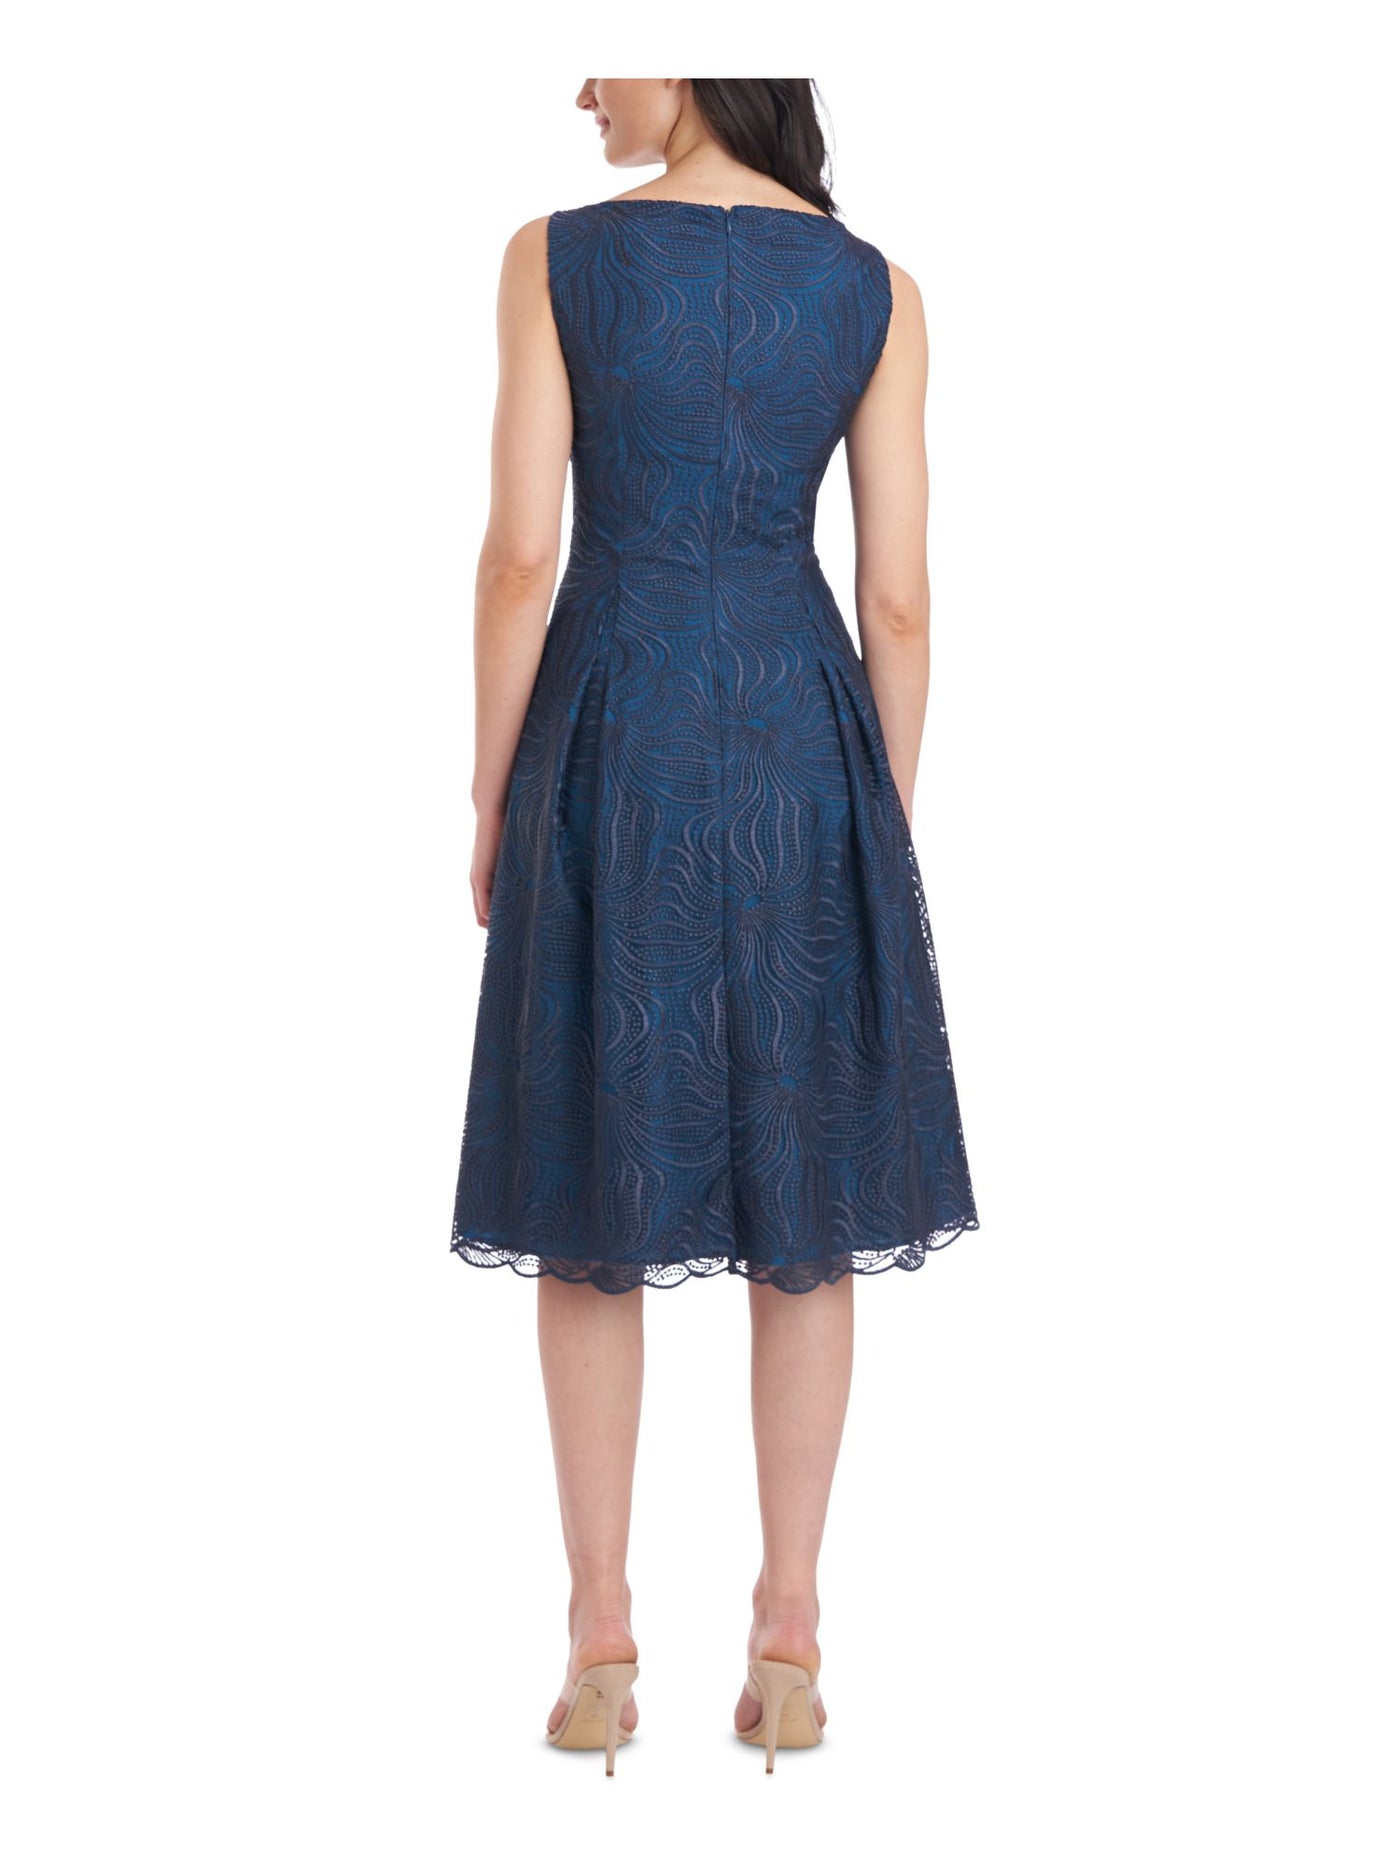 JS COLLECTION Womens Blue Embroidered Zippered Pleated Sleeveless Boat Neck Below The Knee Cocktail Fit + Flare Dress 2